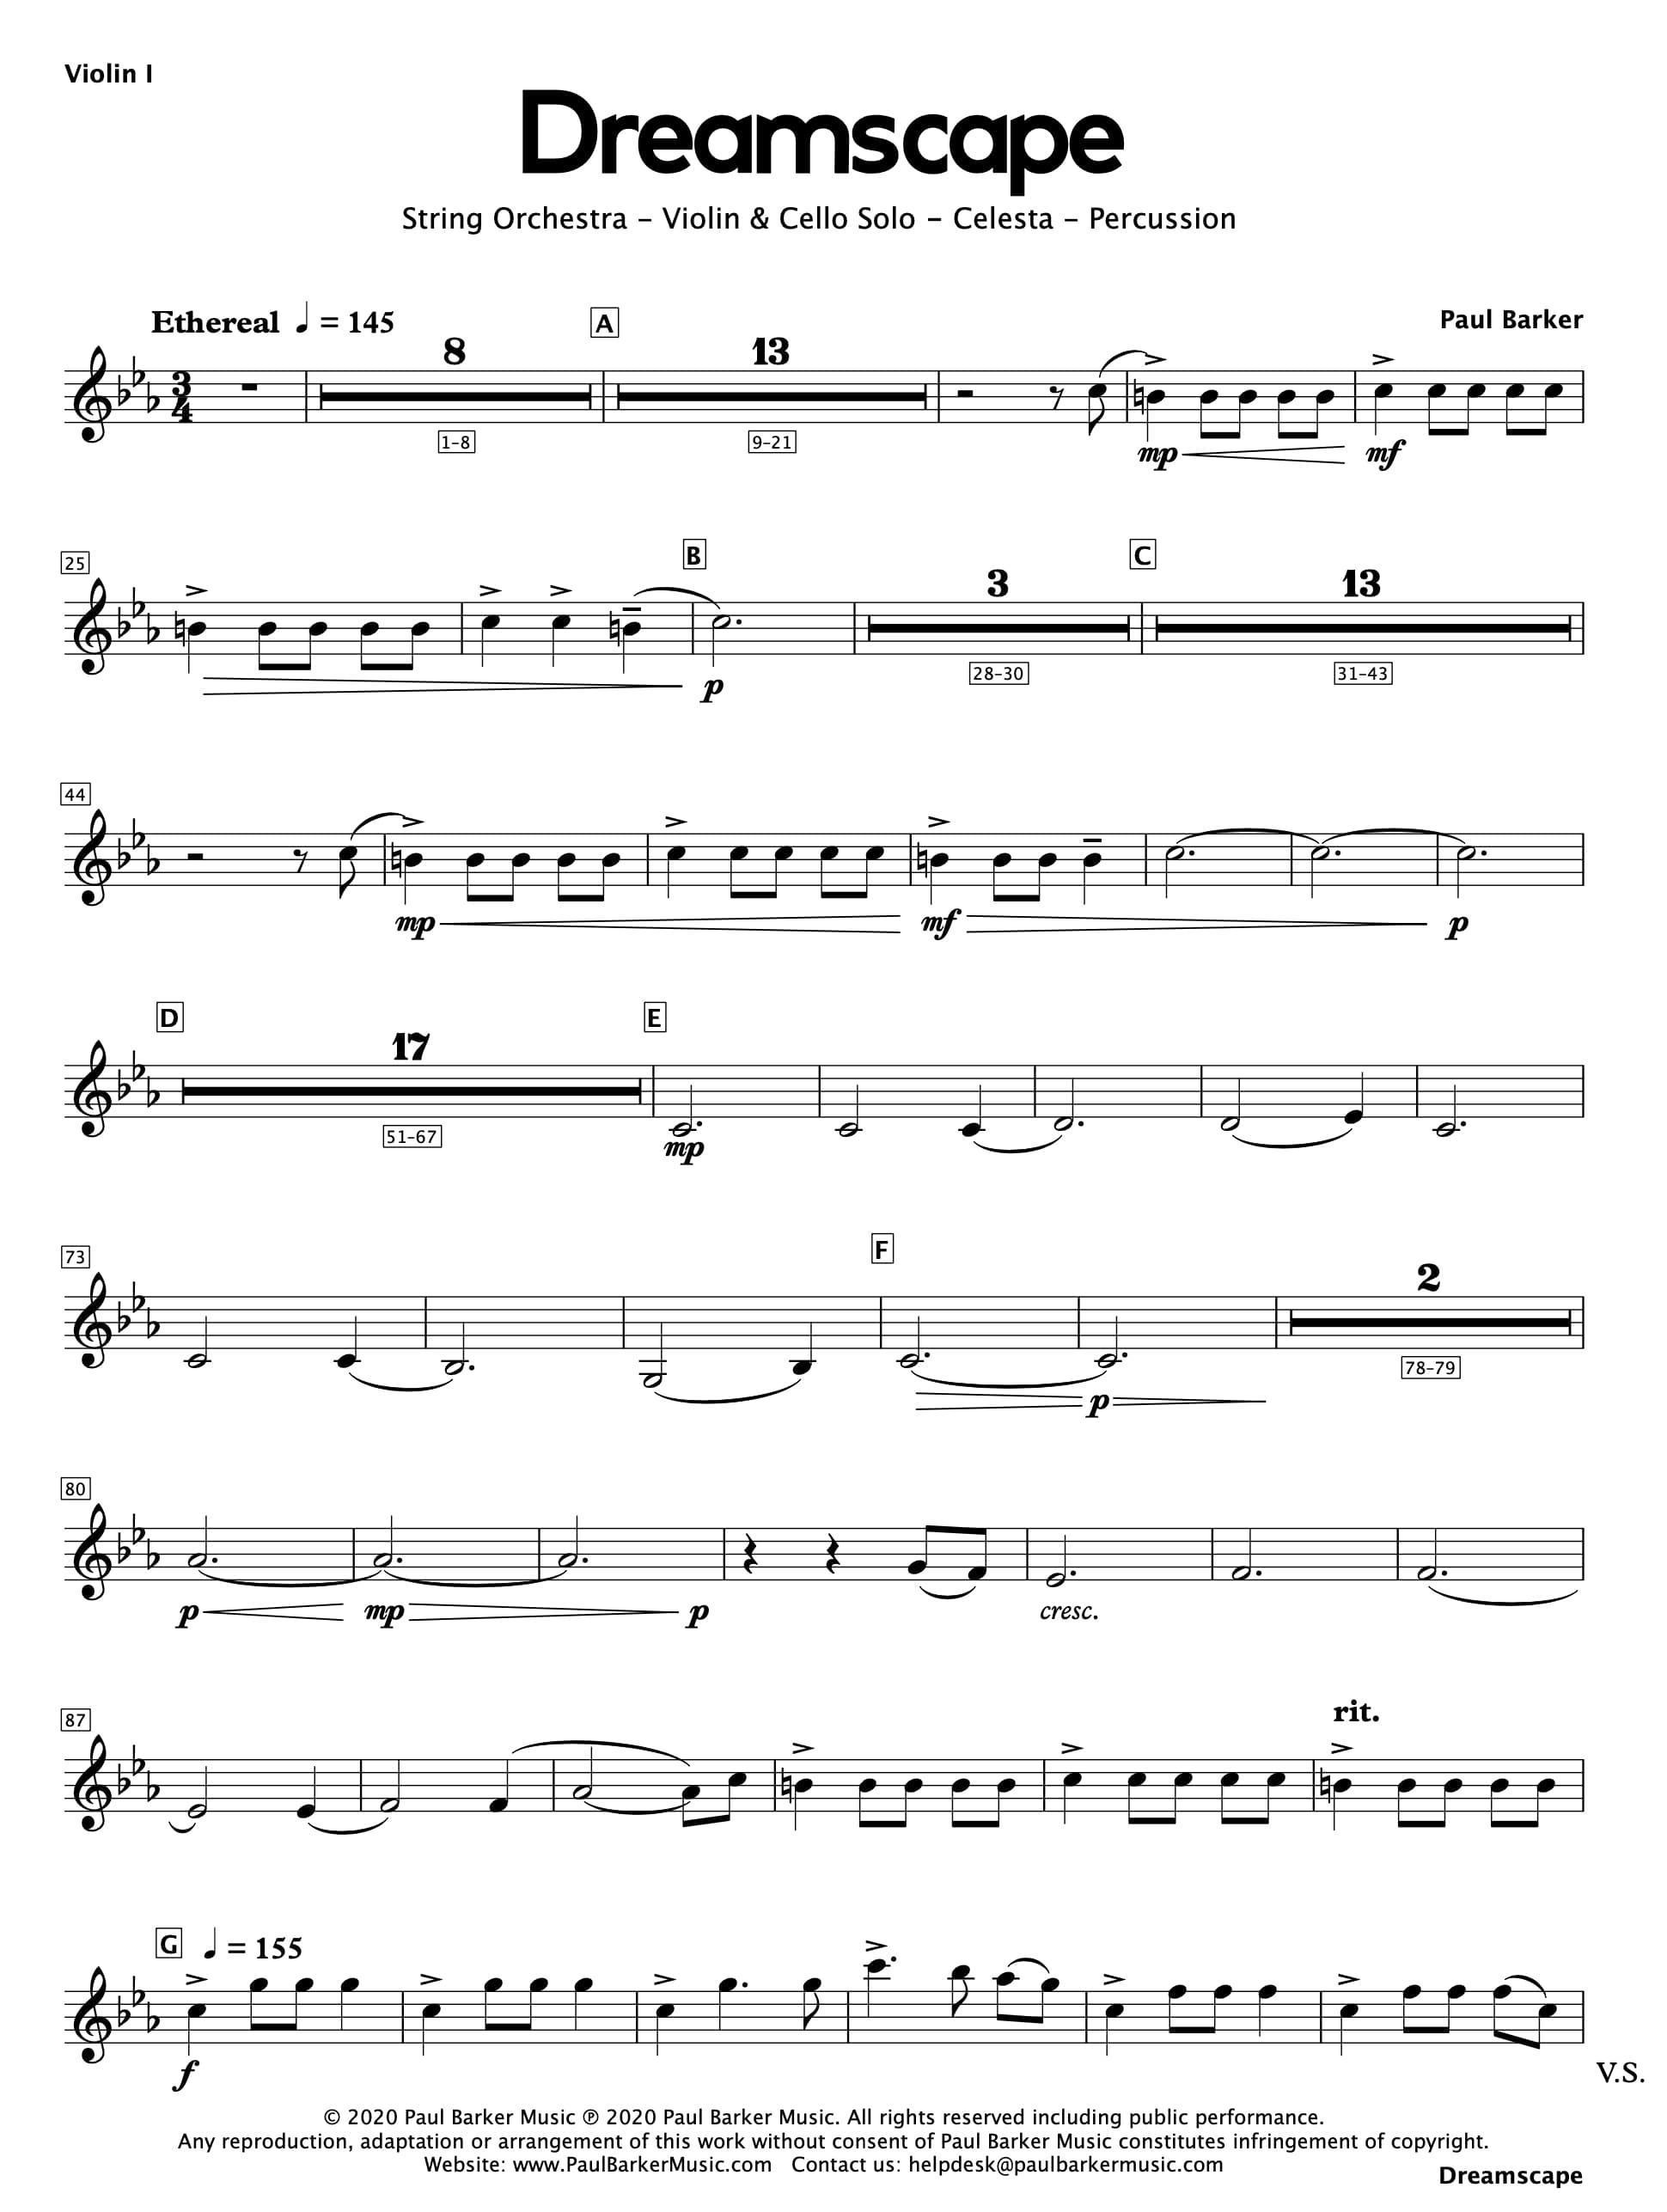 Dream - MASK sheet music for piano download